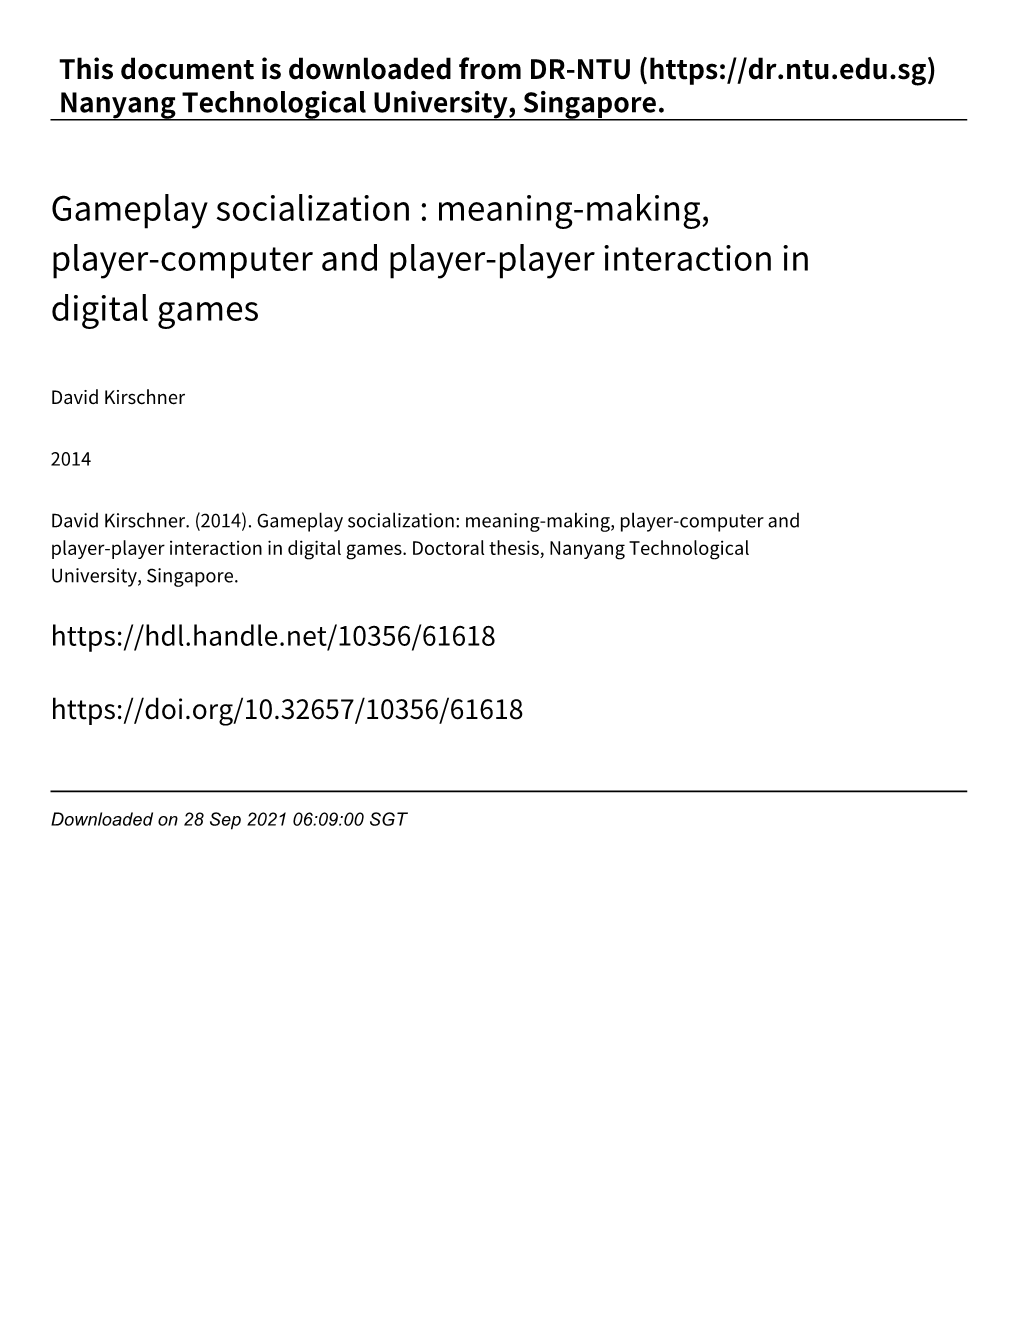 Gameplay Socialization : Meaning‑Making, Player‑Computer and Player‑Player Interaction in Digital Games